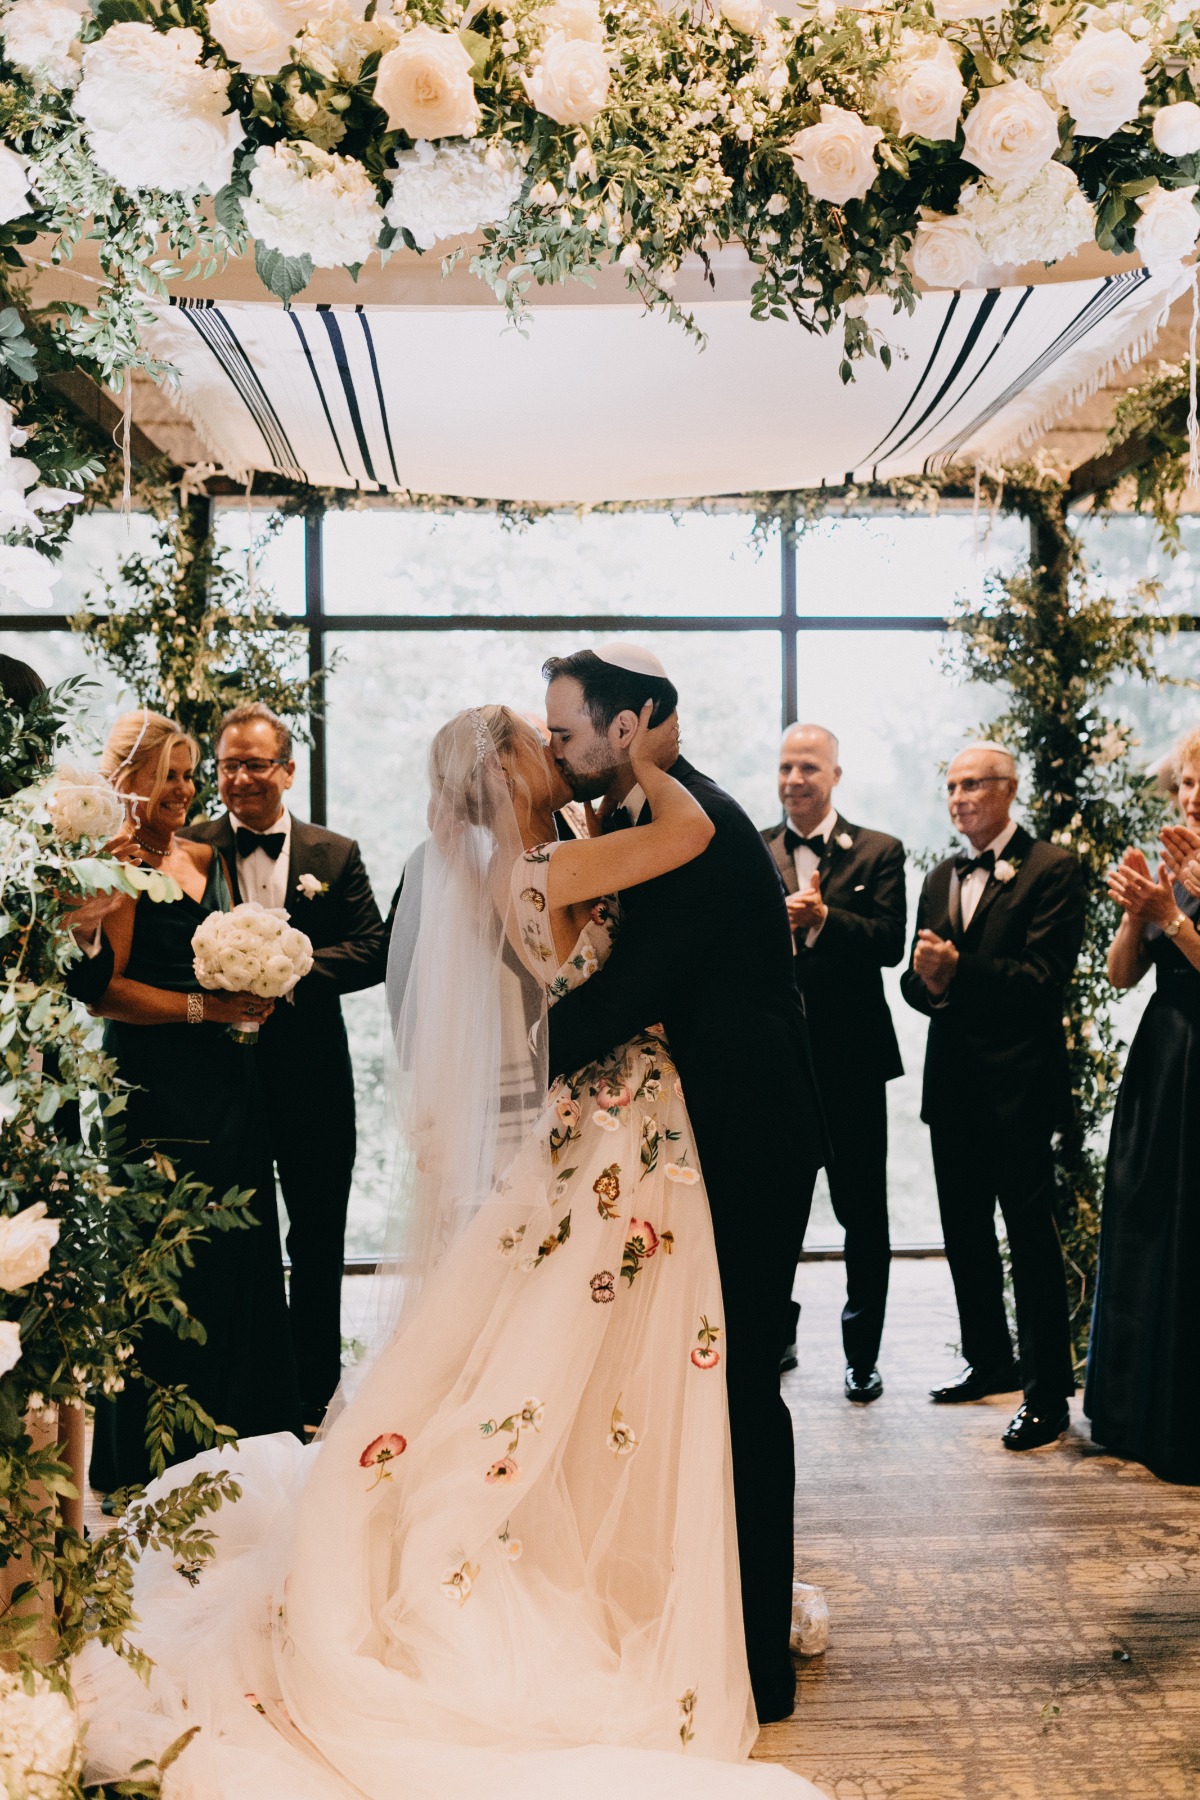 Would You Relocate Your Entire Wedding With Three Months To Spare? This Couple Did...Here's Why